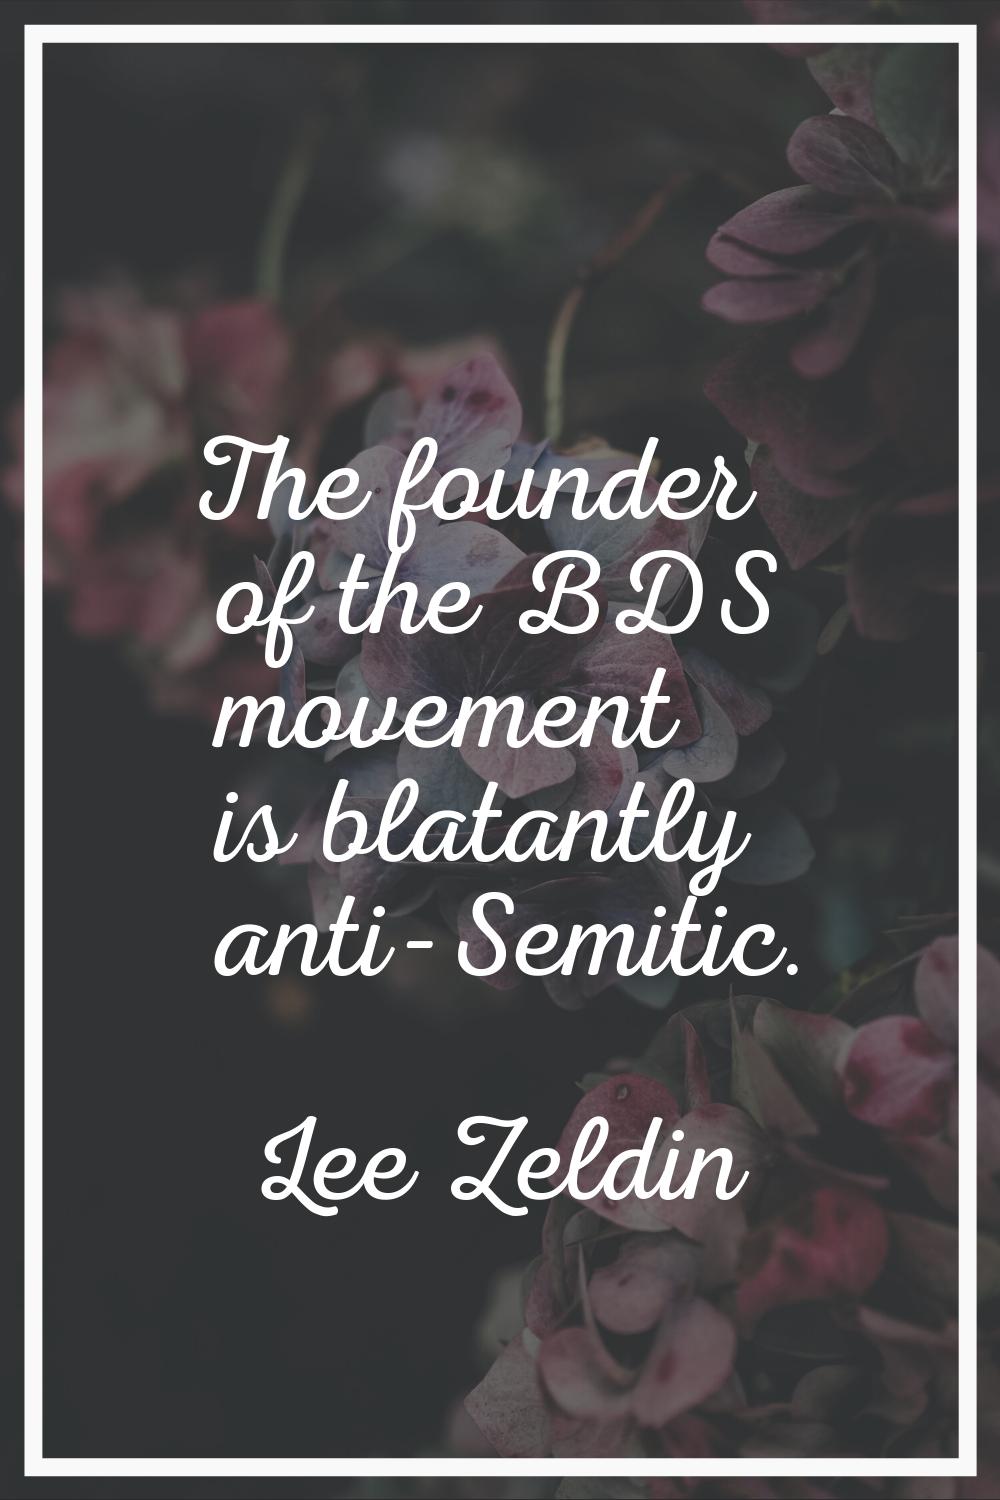 The founder of the BDS movement is blatantly anti-Semitic.